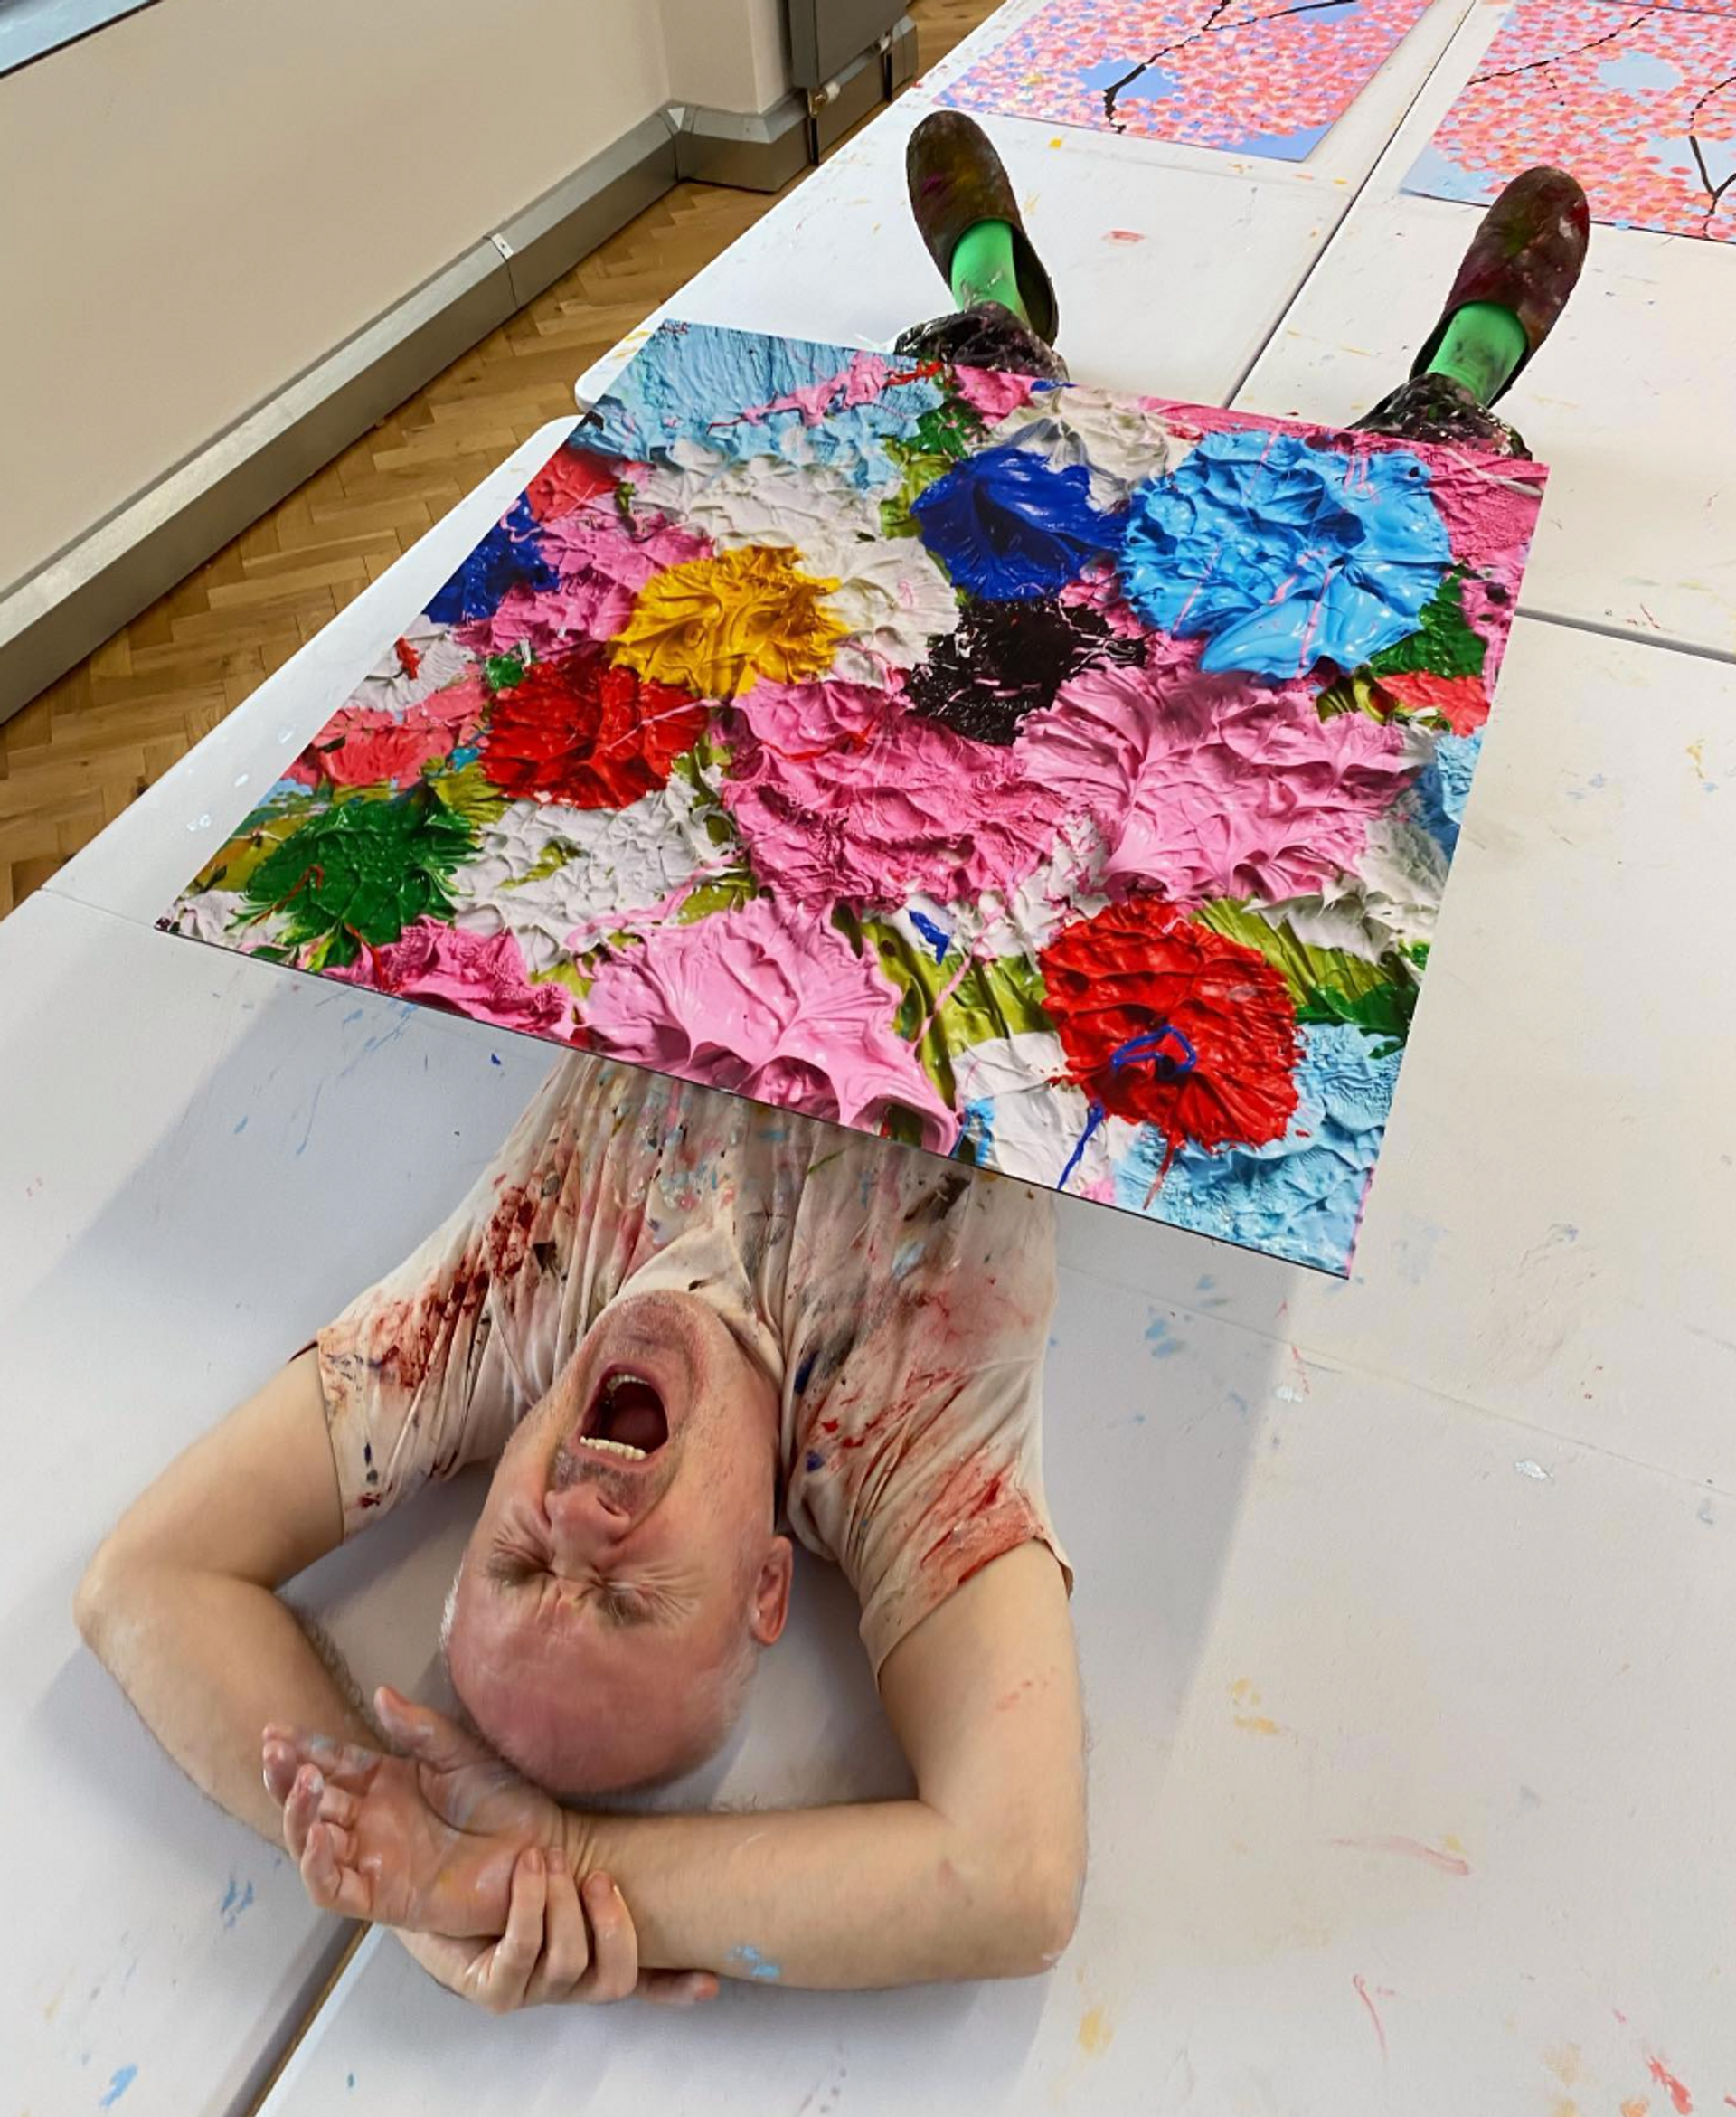 An image of the artist Damien Hirst yawning, while the large size of one of his works from the Fruitful And Forever series lies on his stomach.